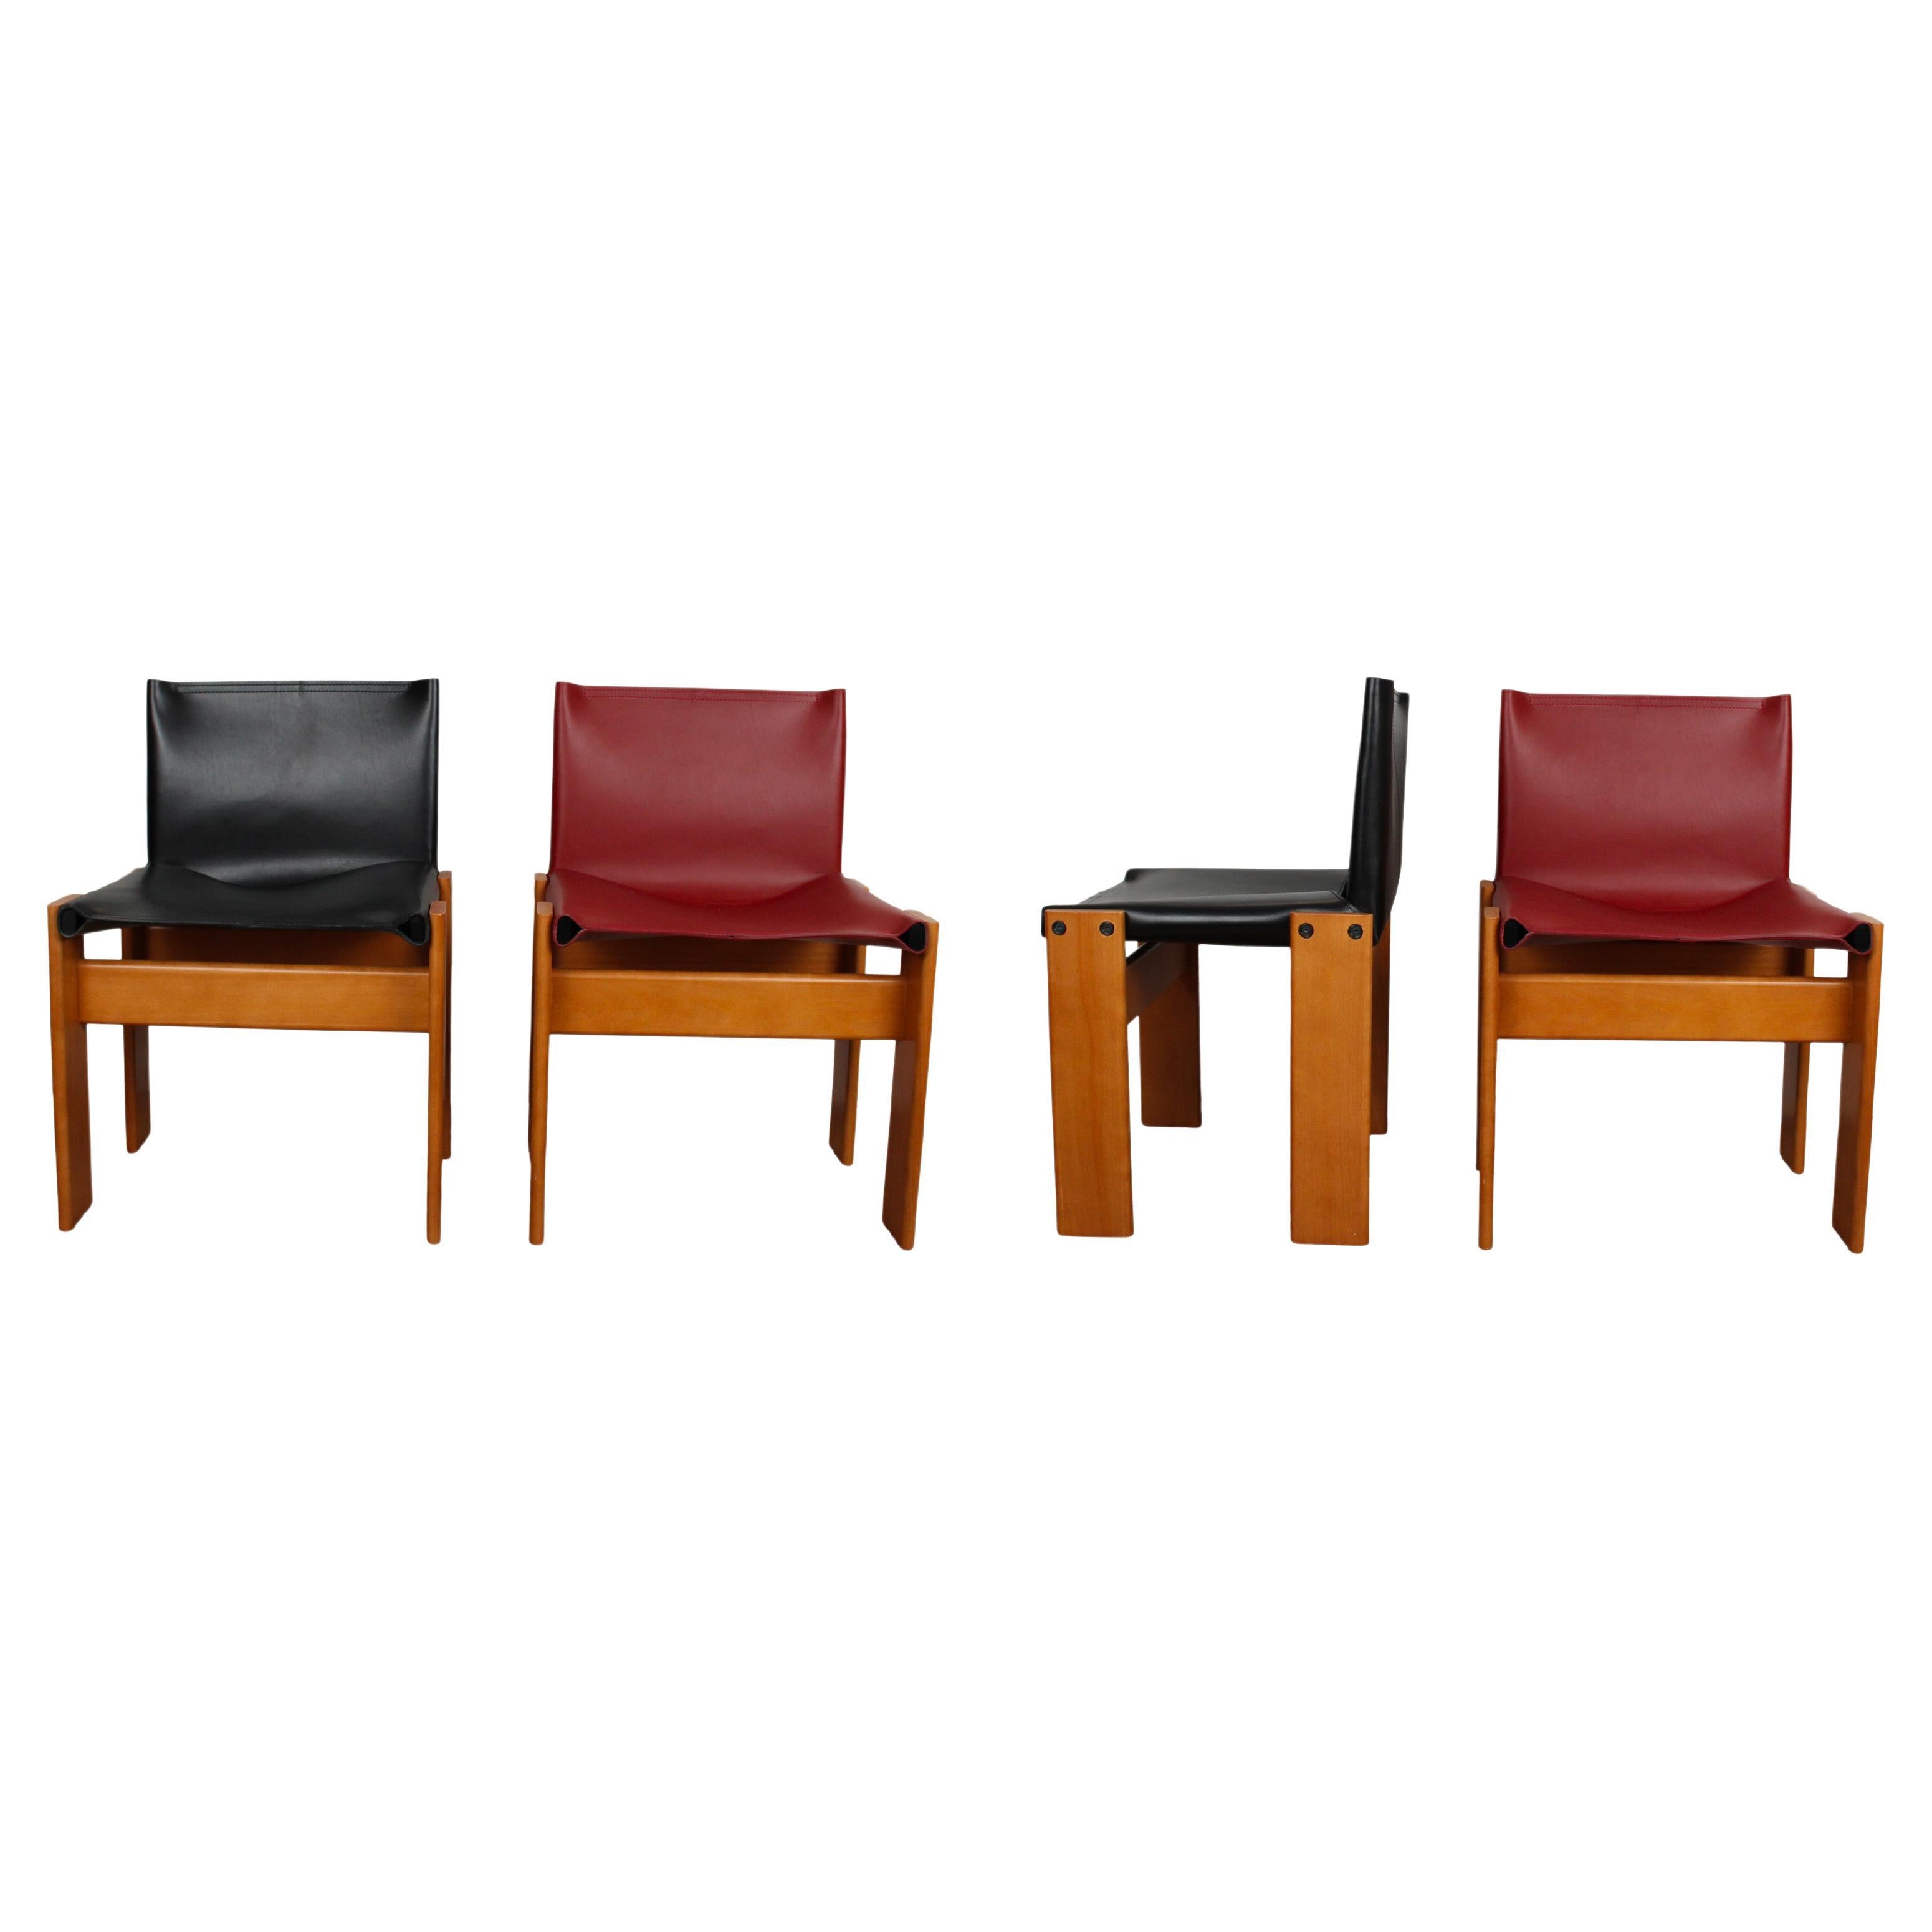 Set of four “Monk” dining chairs designed by Afra and Tobia Scarpa for Molteni in 1973.
Made of English red and black leather and walnut.
Fully restored in Italy.

Interesting is the ‘flat’ shape of this chair where the designer has chosen to place